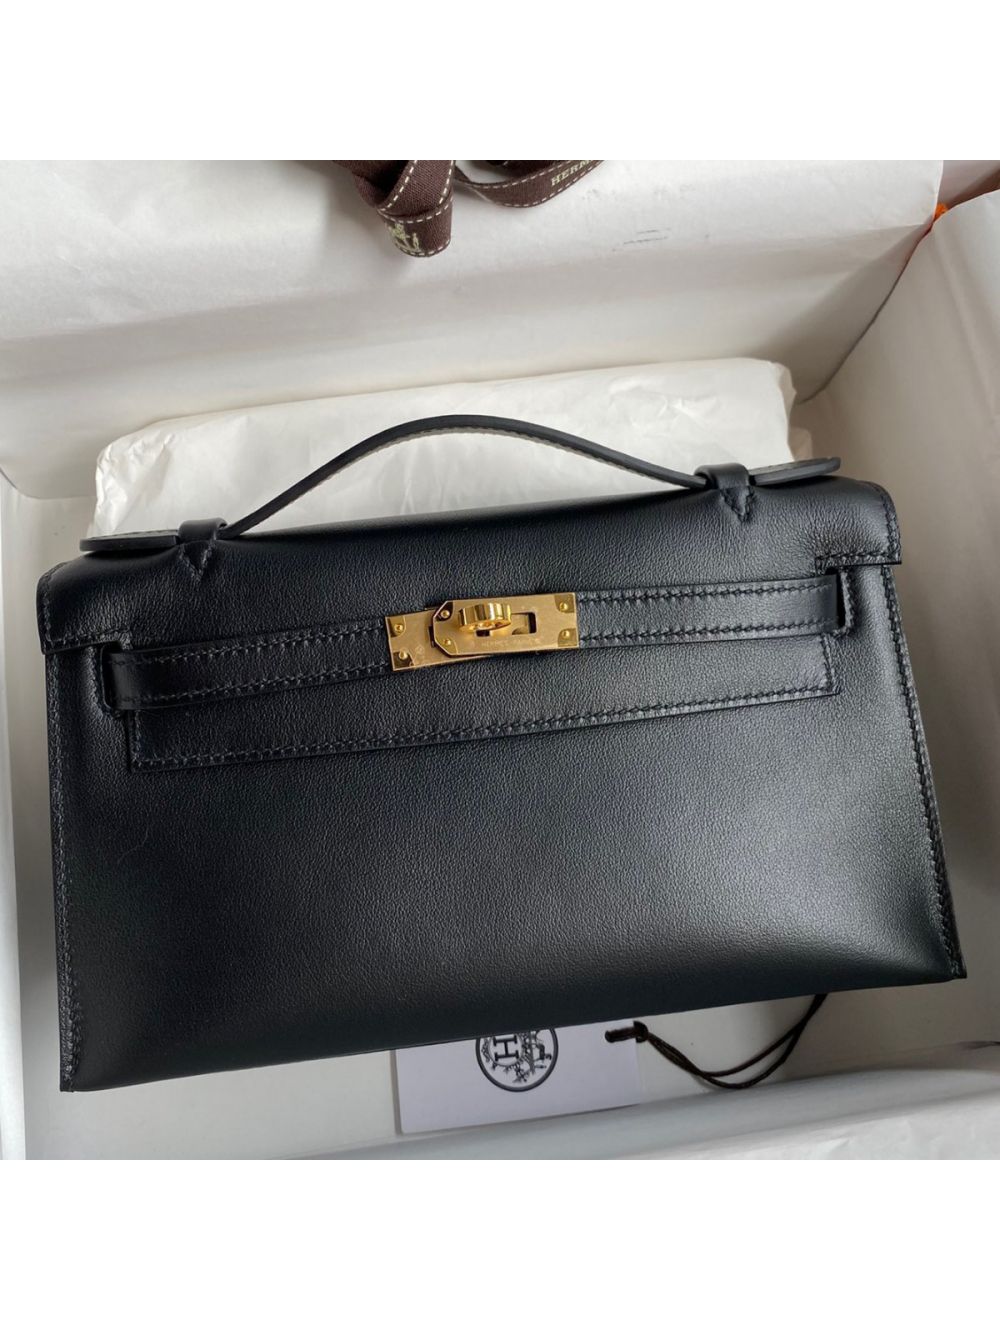 Replica Hermes Kelly Pochette Bags Collection